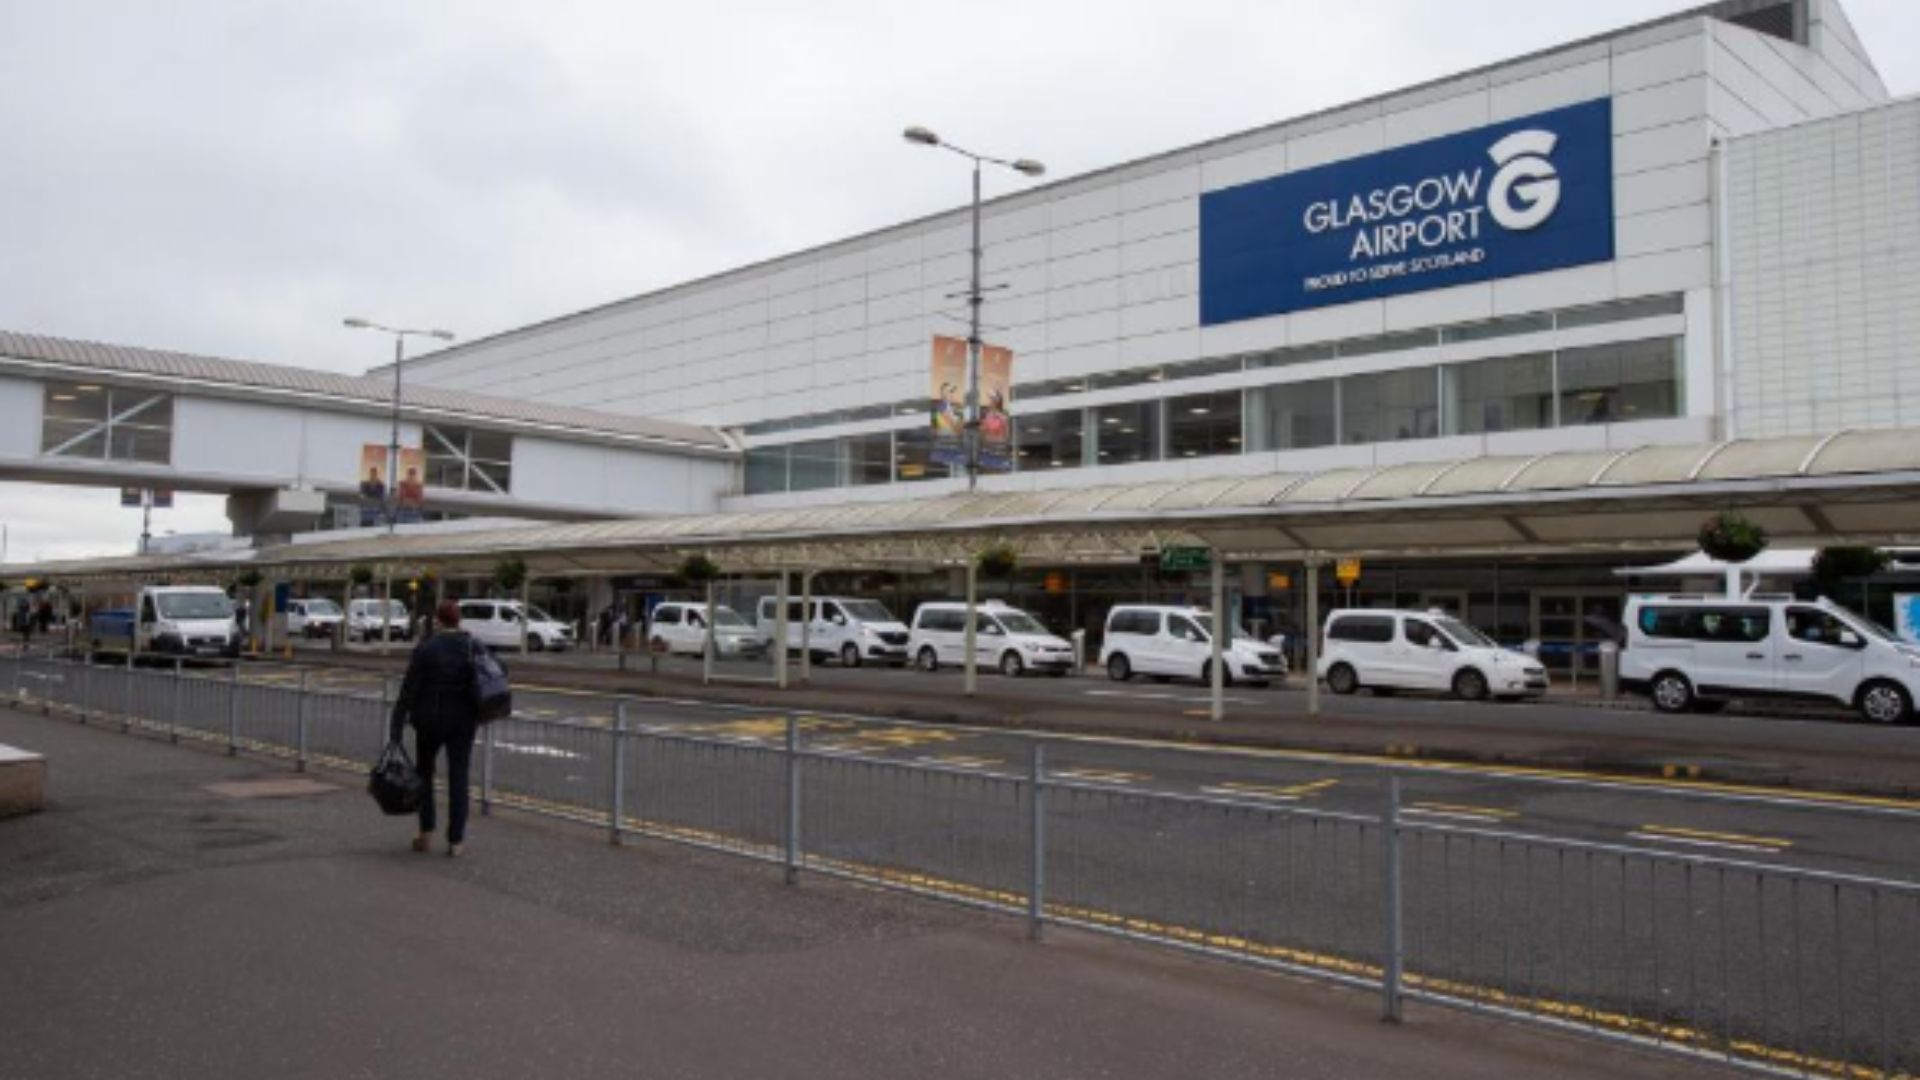 Glasgow Airport emptied because of progressing police incident